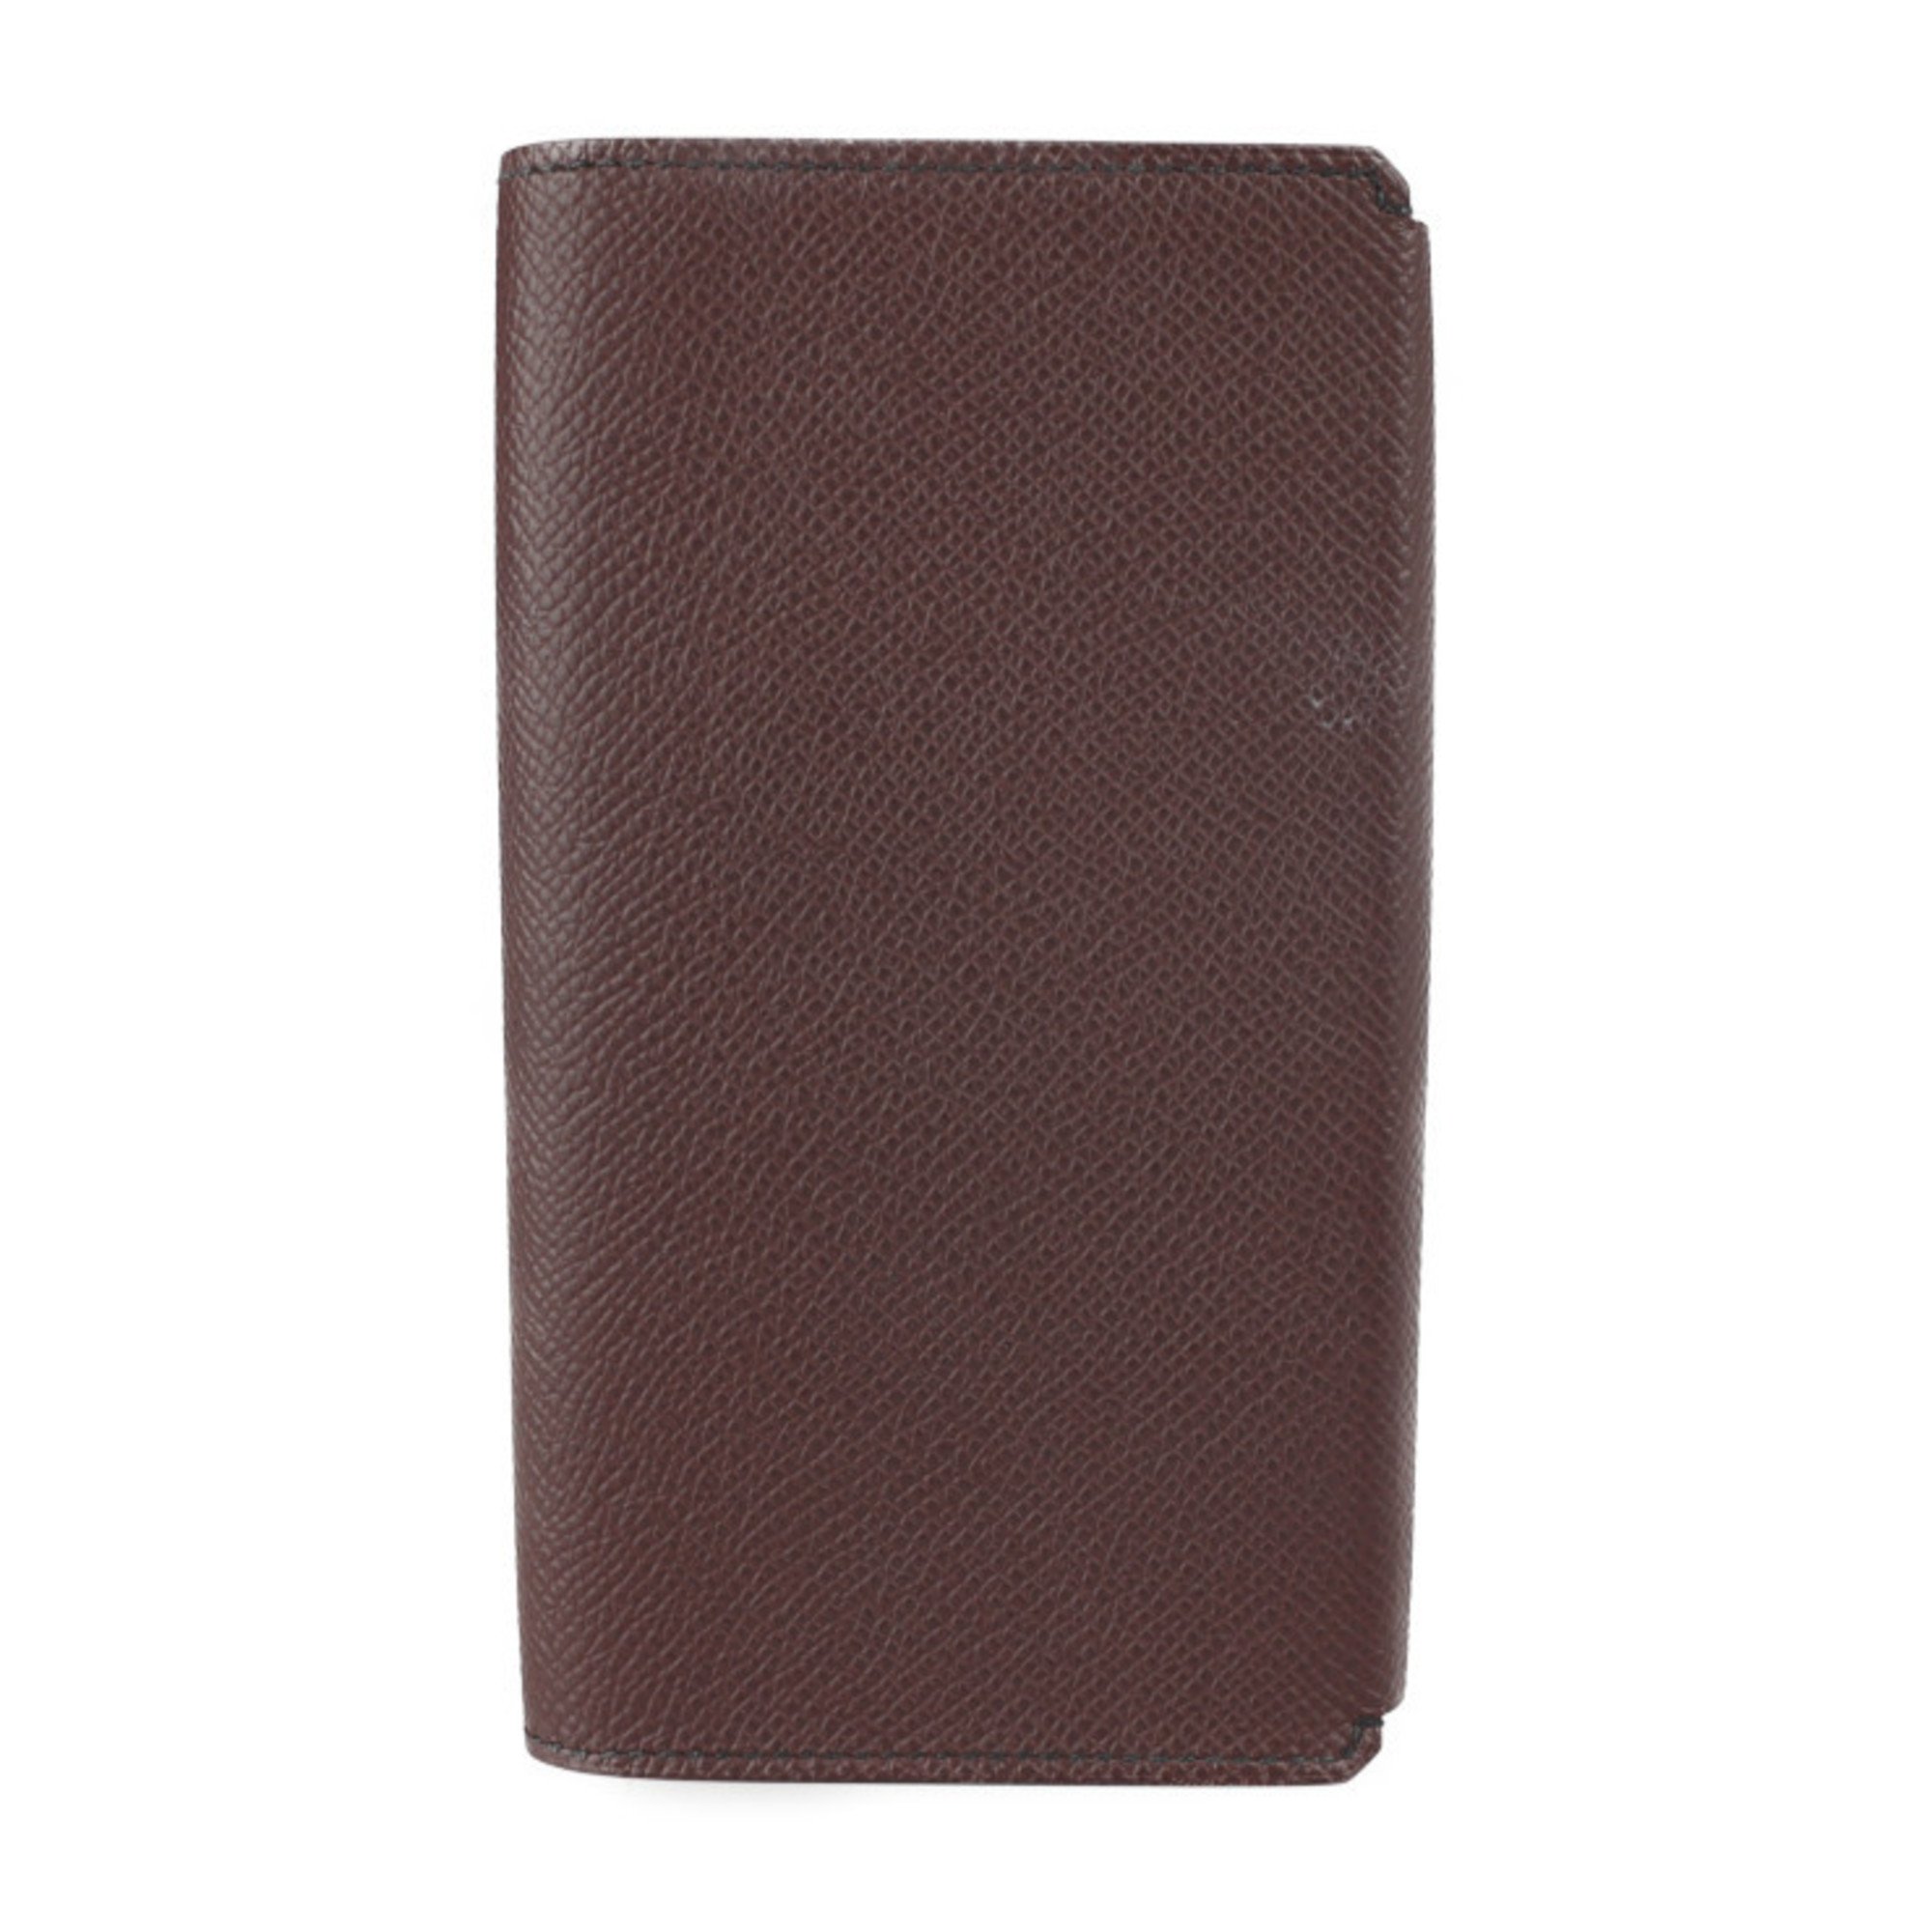 HERMES Hermes Etui Smart Classic Other Accessories Vaux Epsom Brown Navy Notebook Type Smartphone Case Card A Engraved